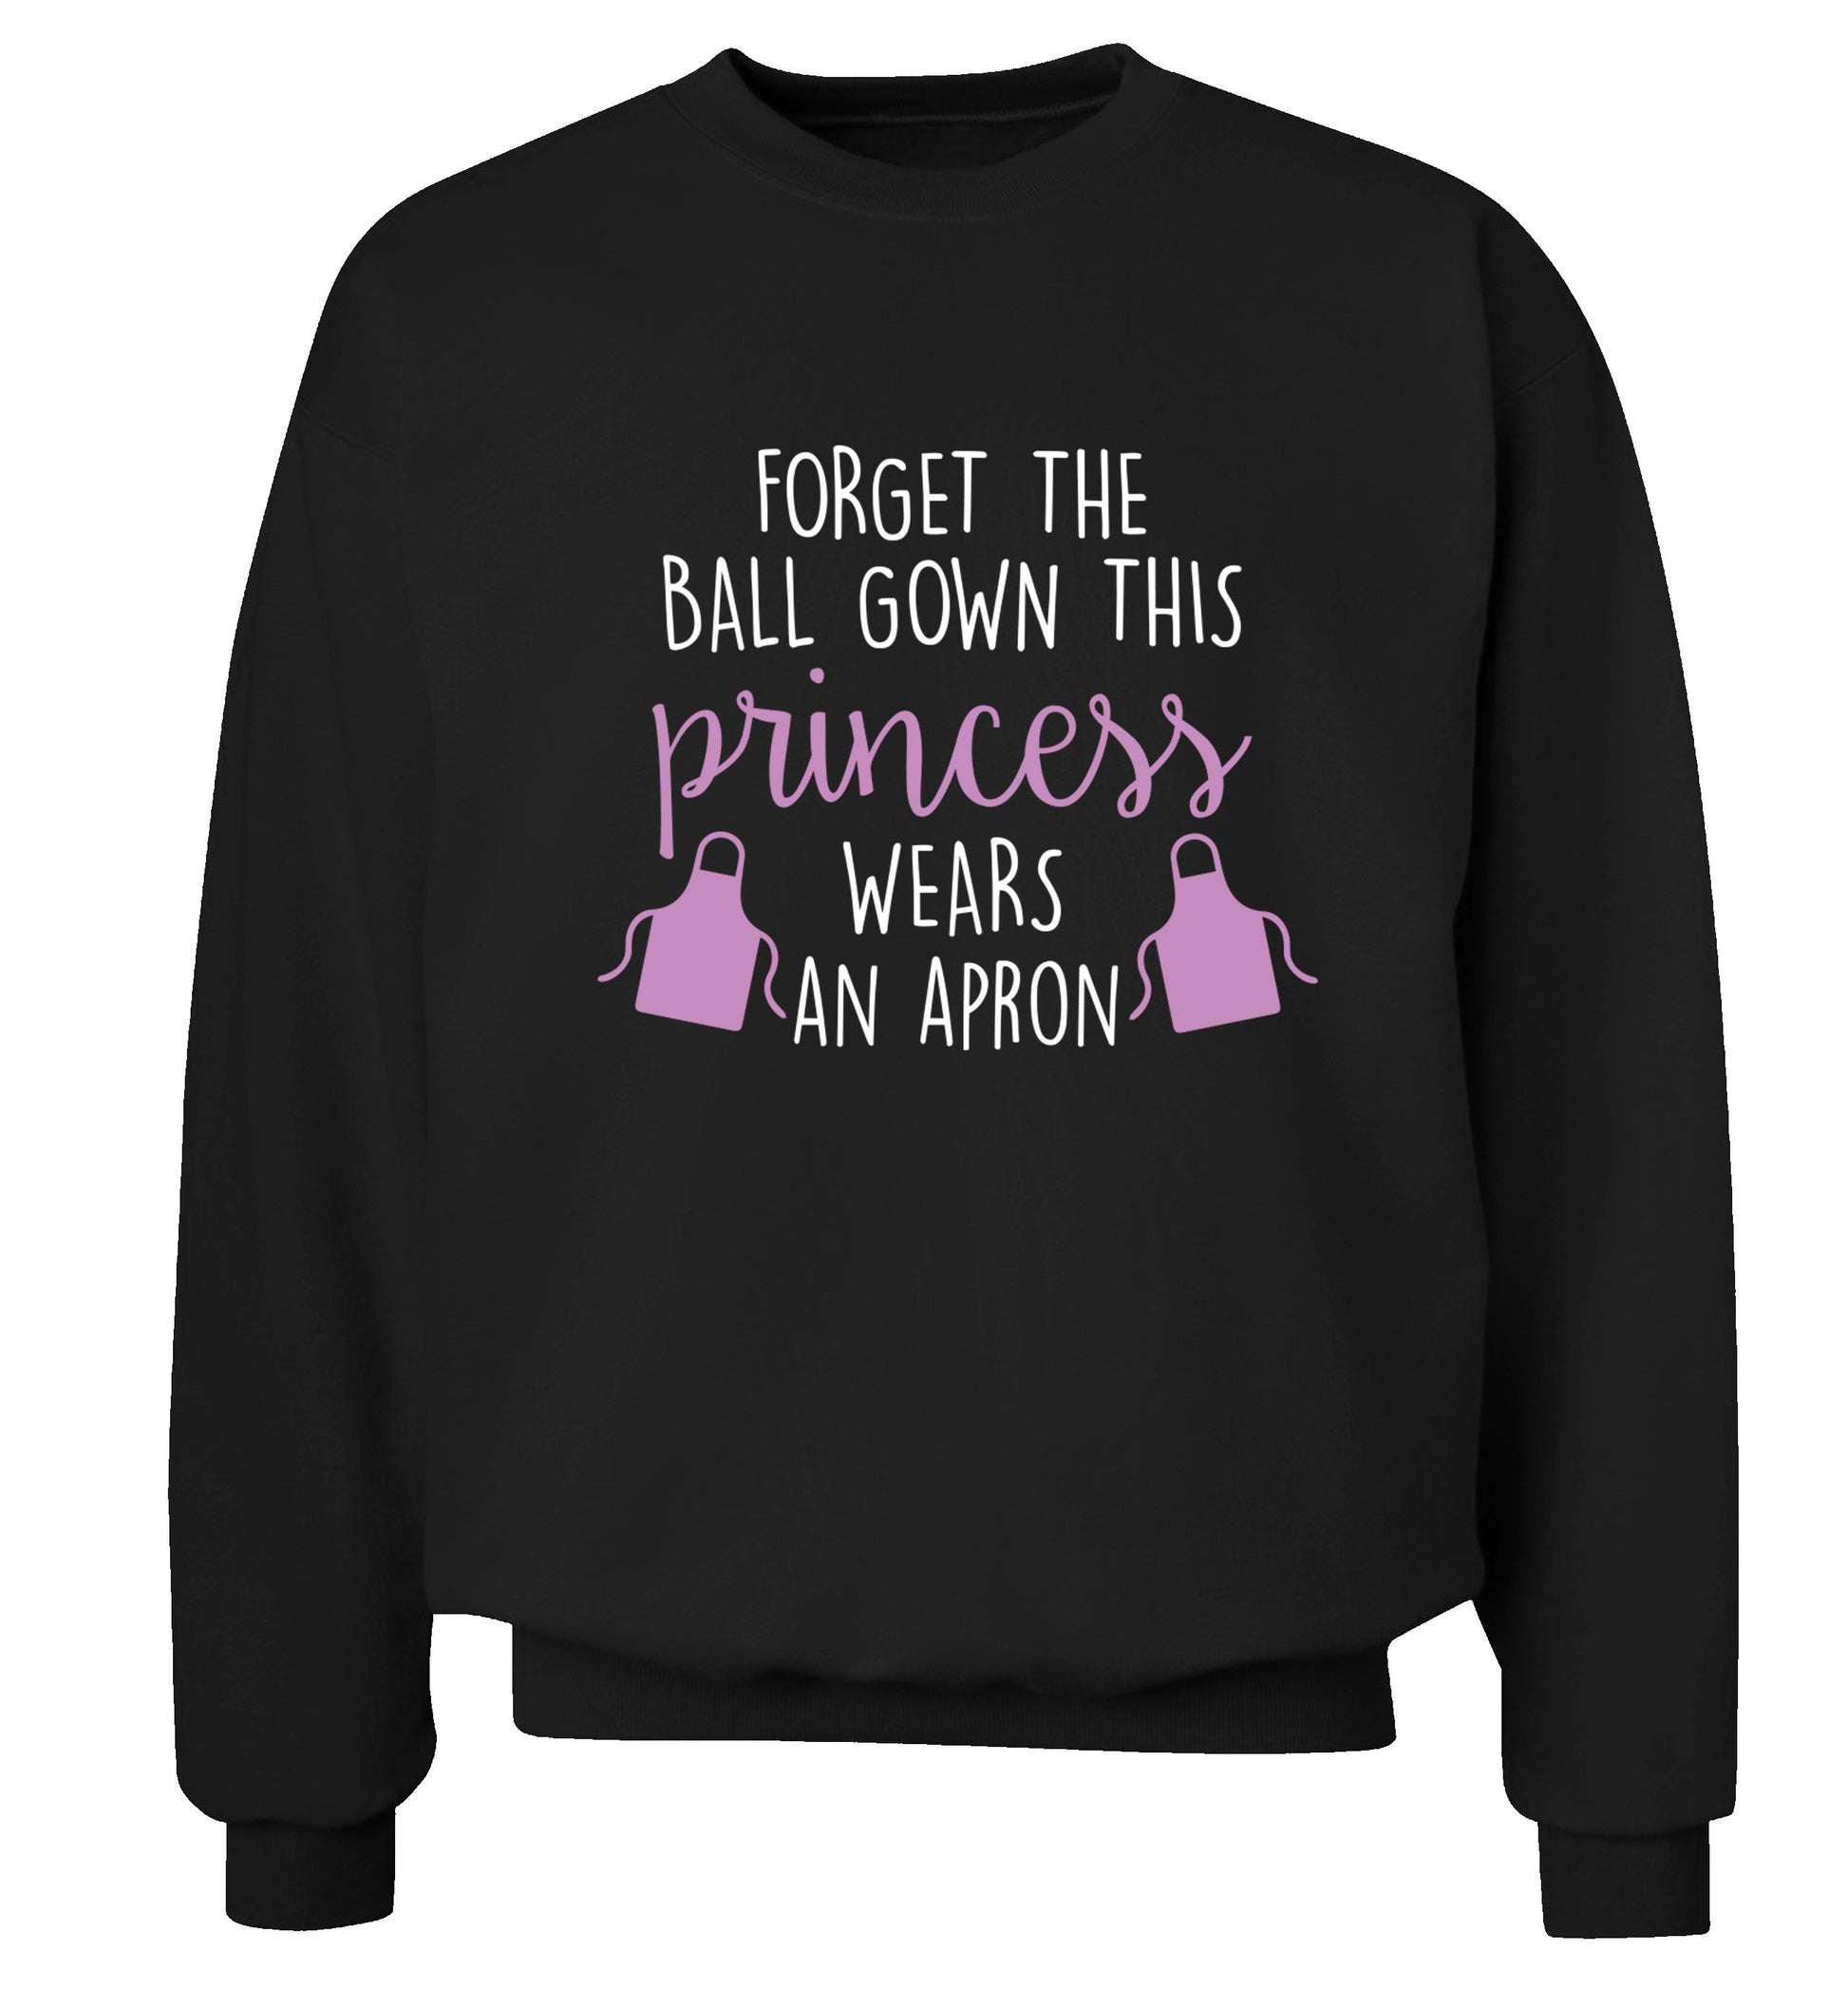 Forget the ball gown this princess wears an apron Adult's unisex black Sweater 2XL